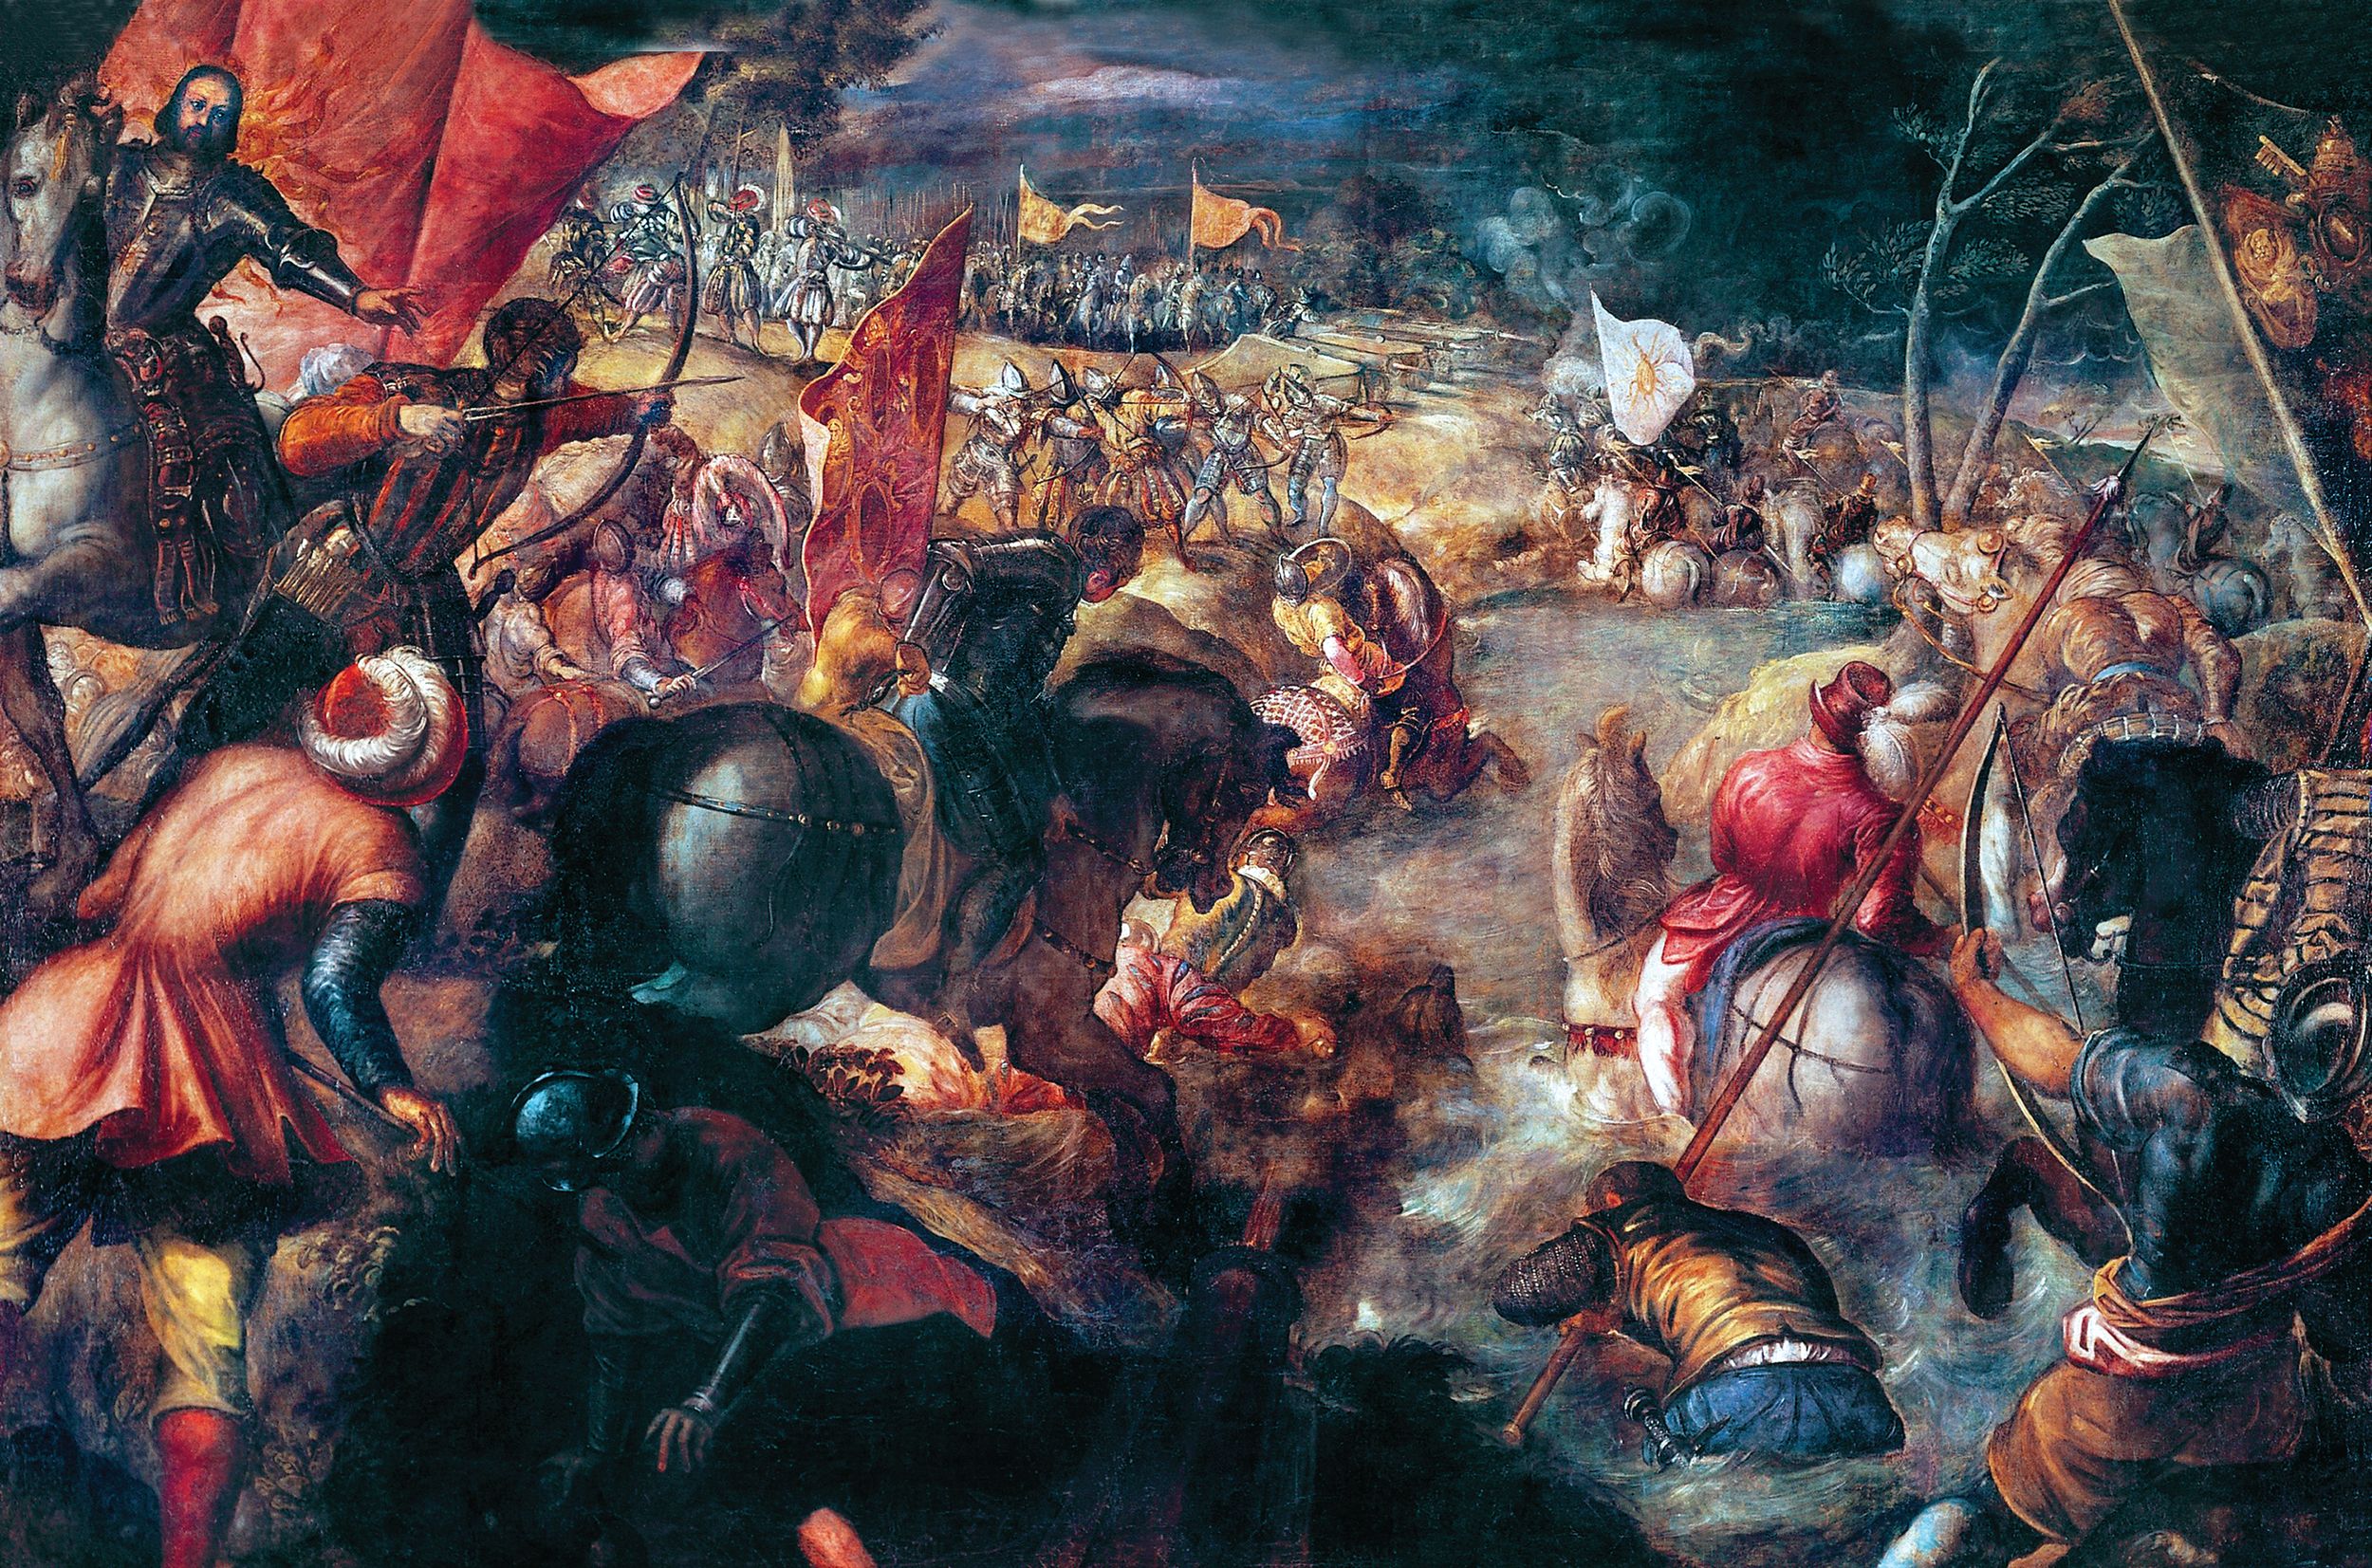 By the time Italian commander Giovanni Francesco Gonzaga (seen in the upper left corner) launched his main attack, the Toro River was rain swollen, and his mounted troops struggled to cross. In the distance, Italian knights struggle to ride up the muddy banks, while the French wait for them with cannon, archers, pikemen and knights.